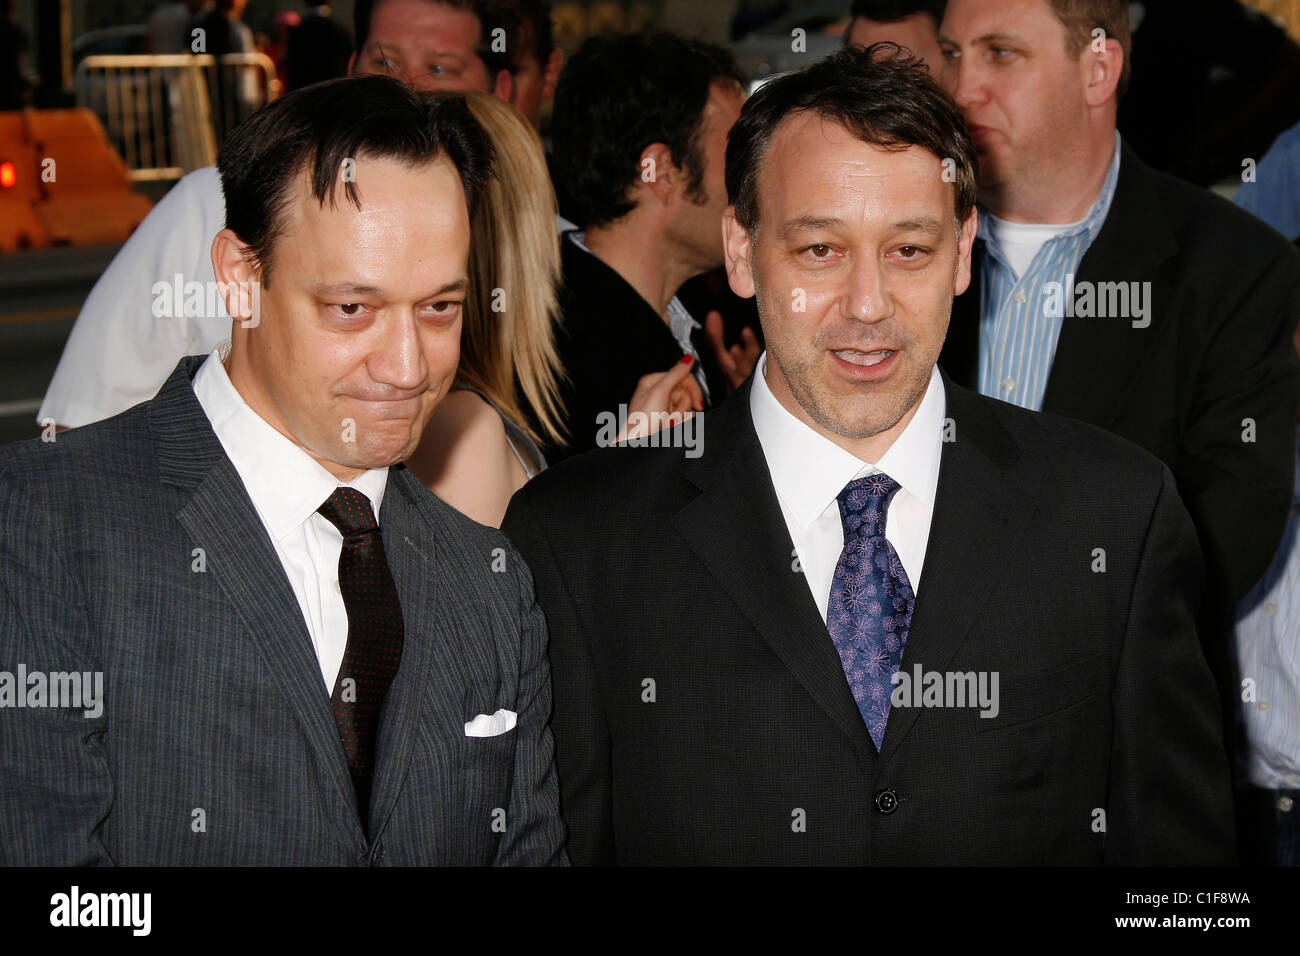 Ted Raimi and Sam Raimi Los Angeles premiere of 'Drag Me To Hell' held at Grauman's Chinese Theatre in Hollywood - Arrivals Los Stock Photo